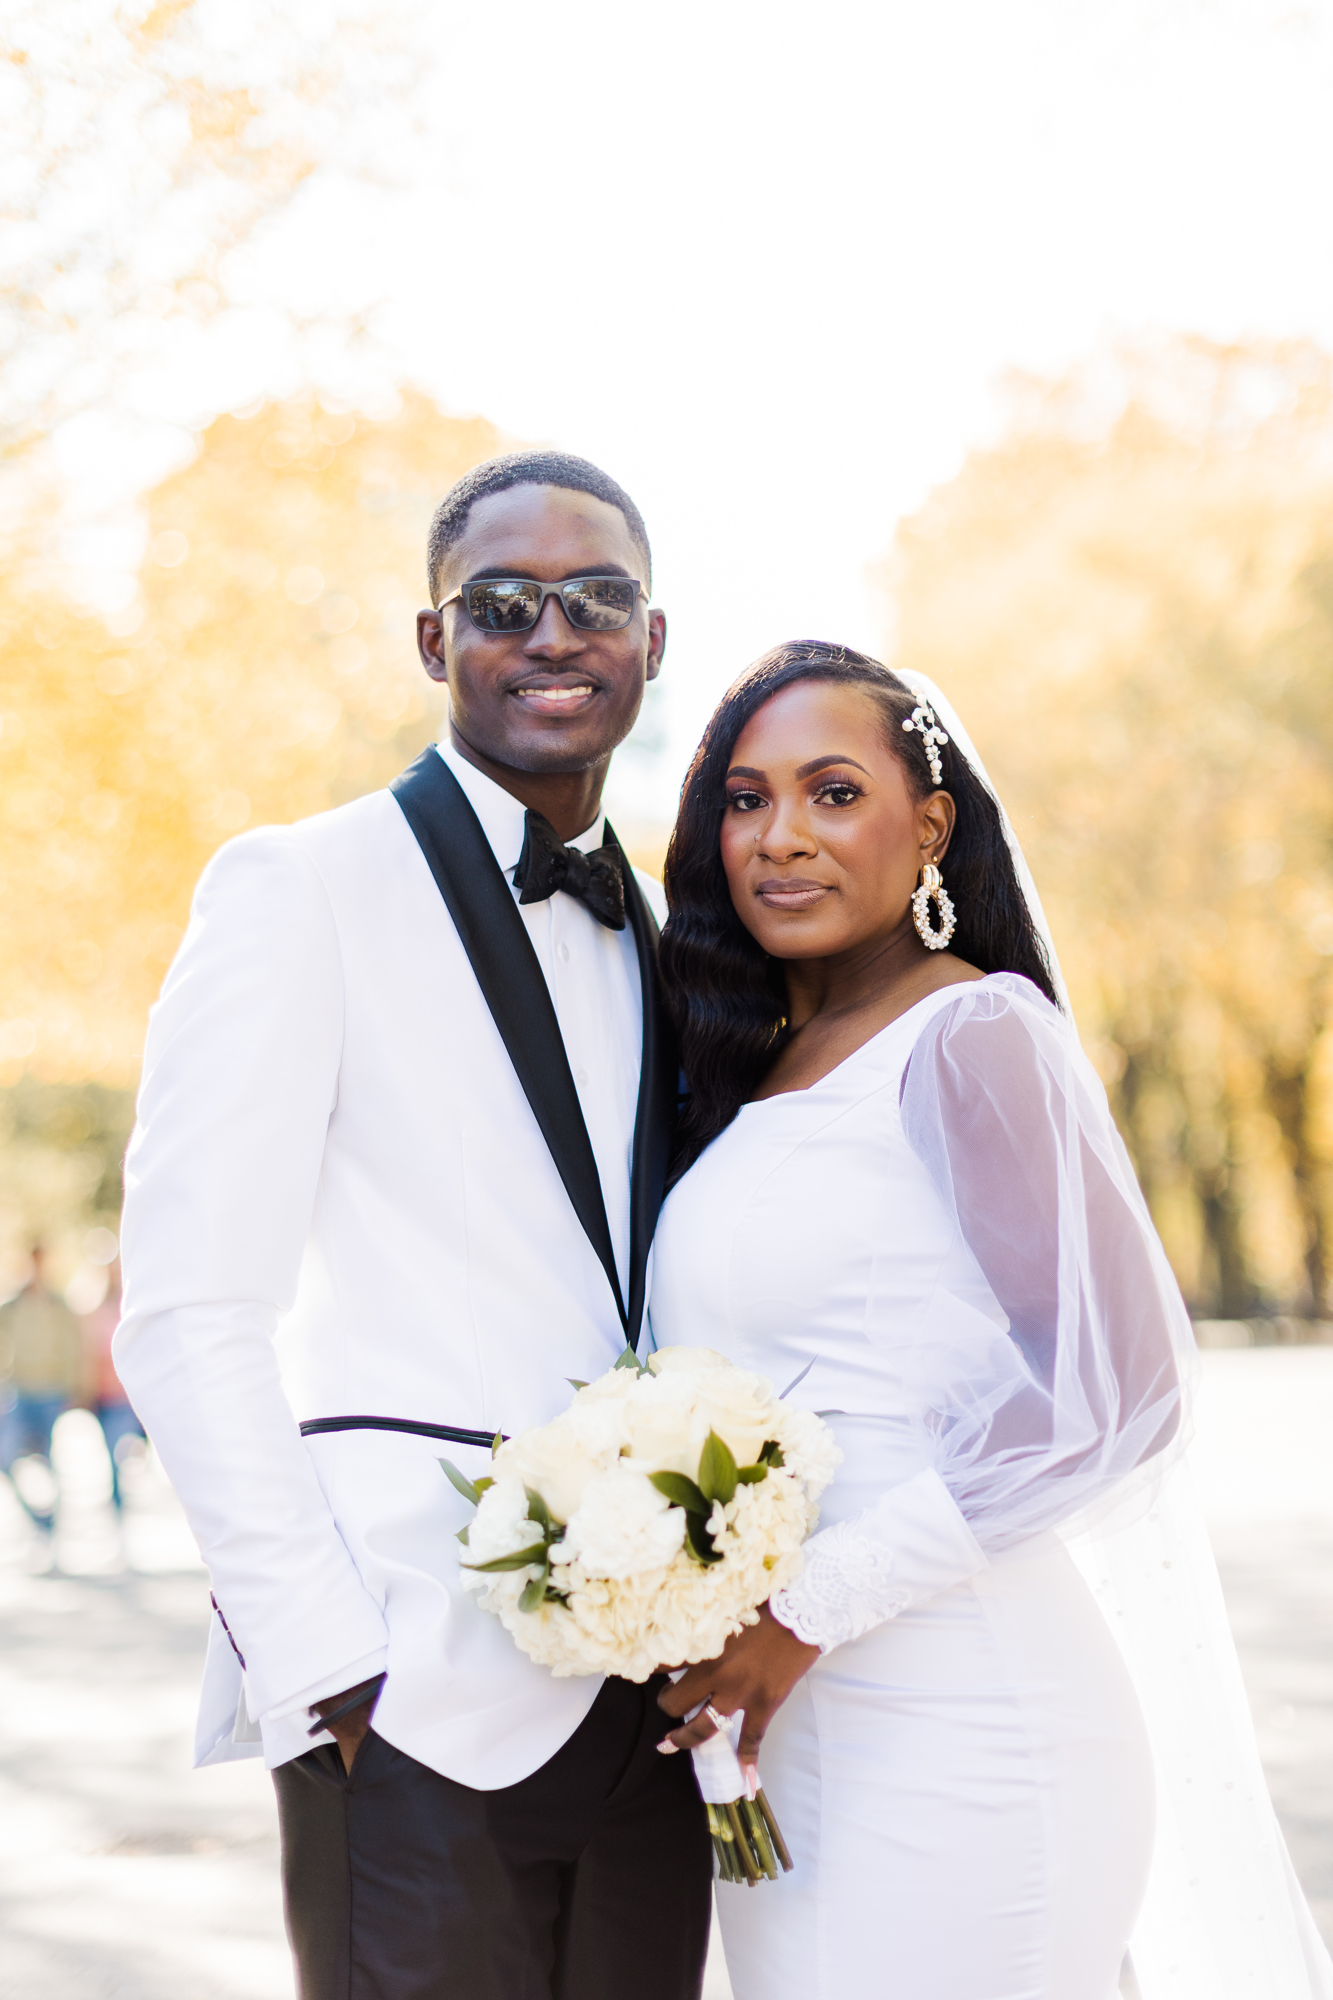 Dazzling Central Park Wedding Photos on Cherry Hill in Fall